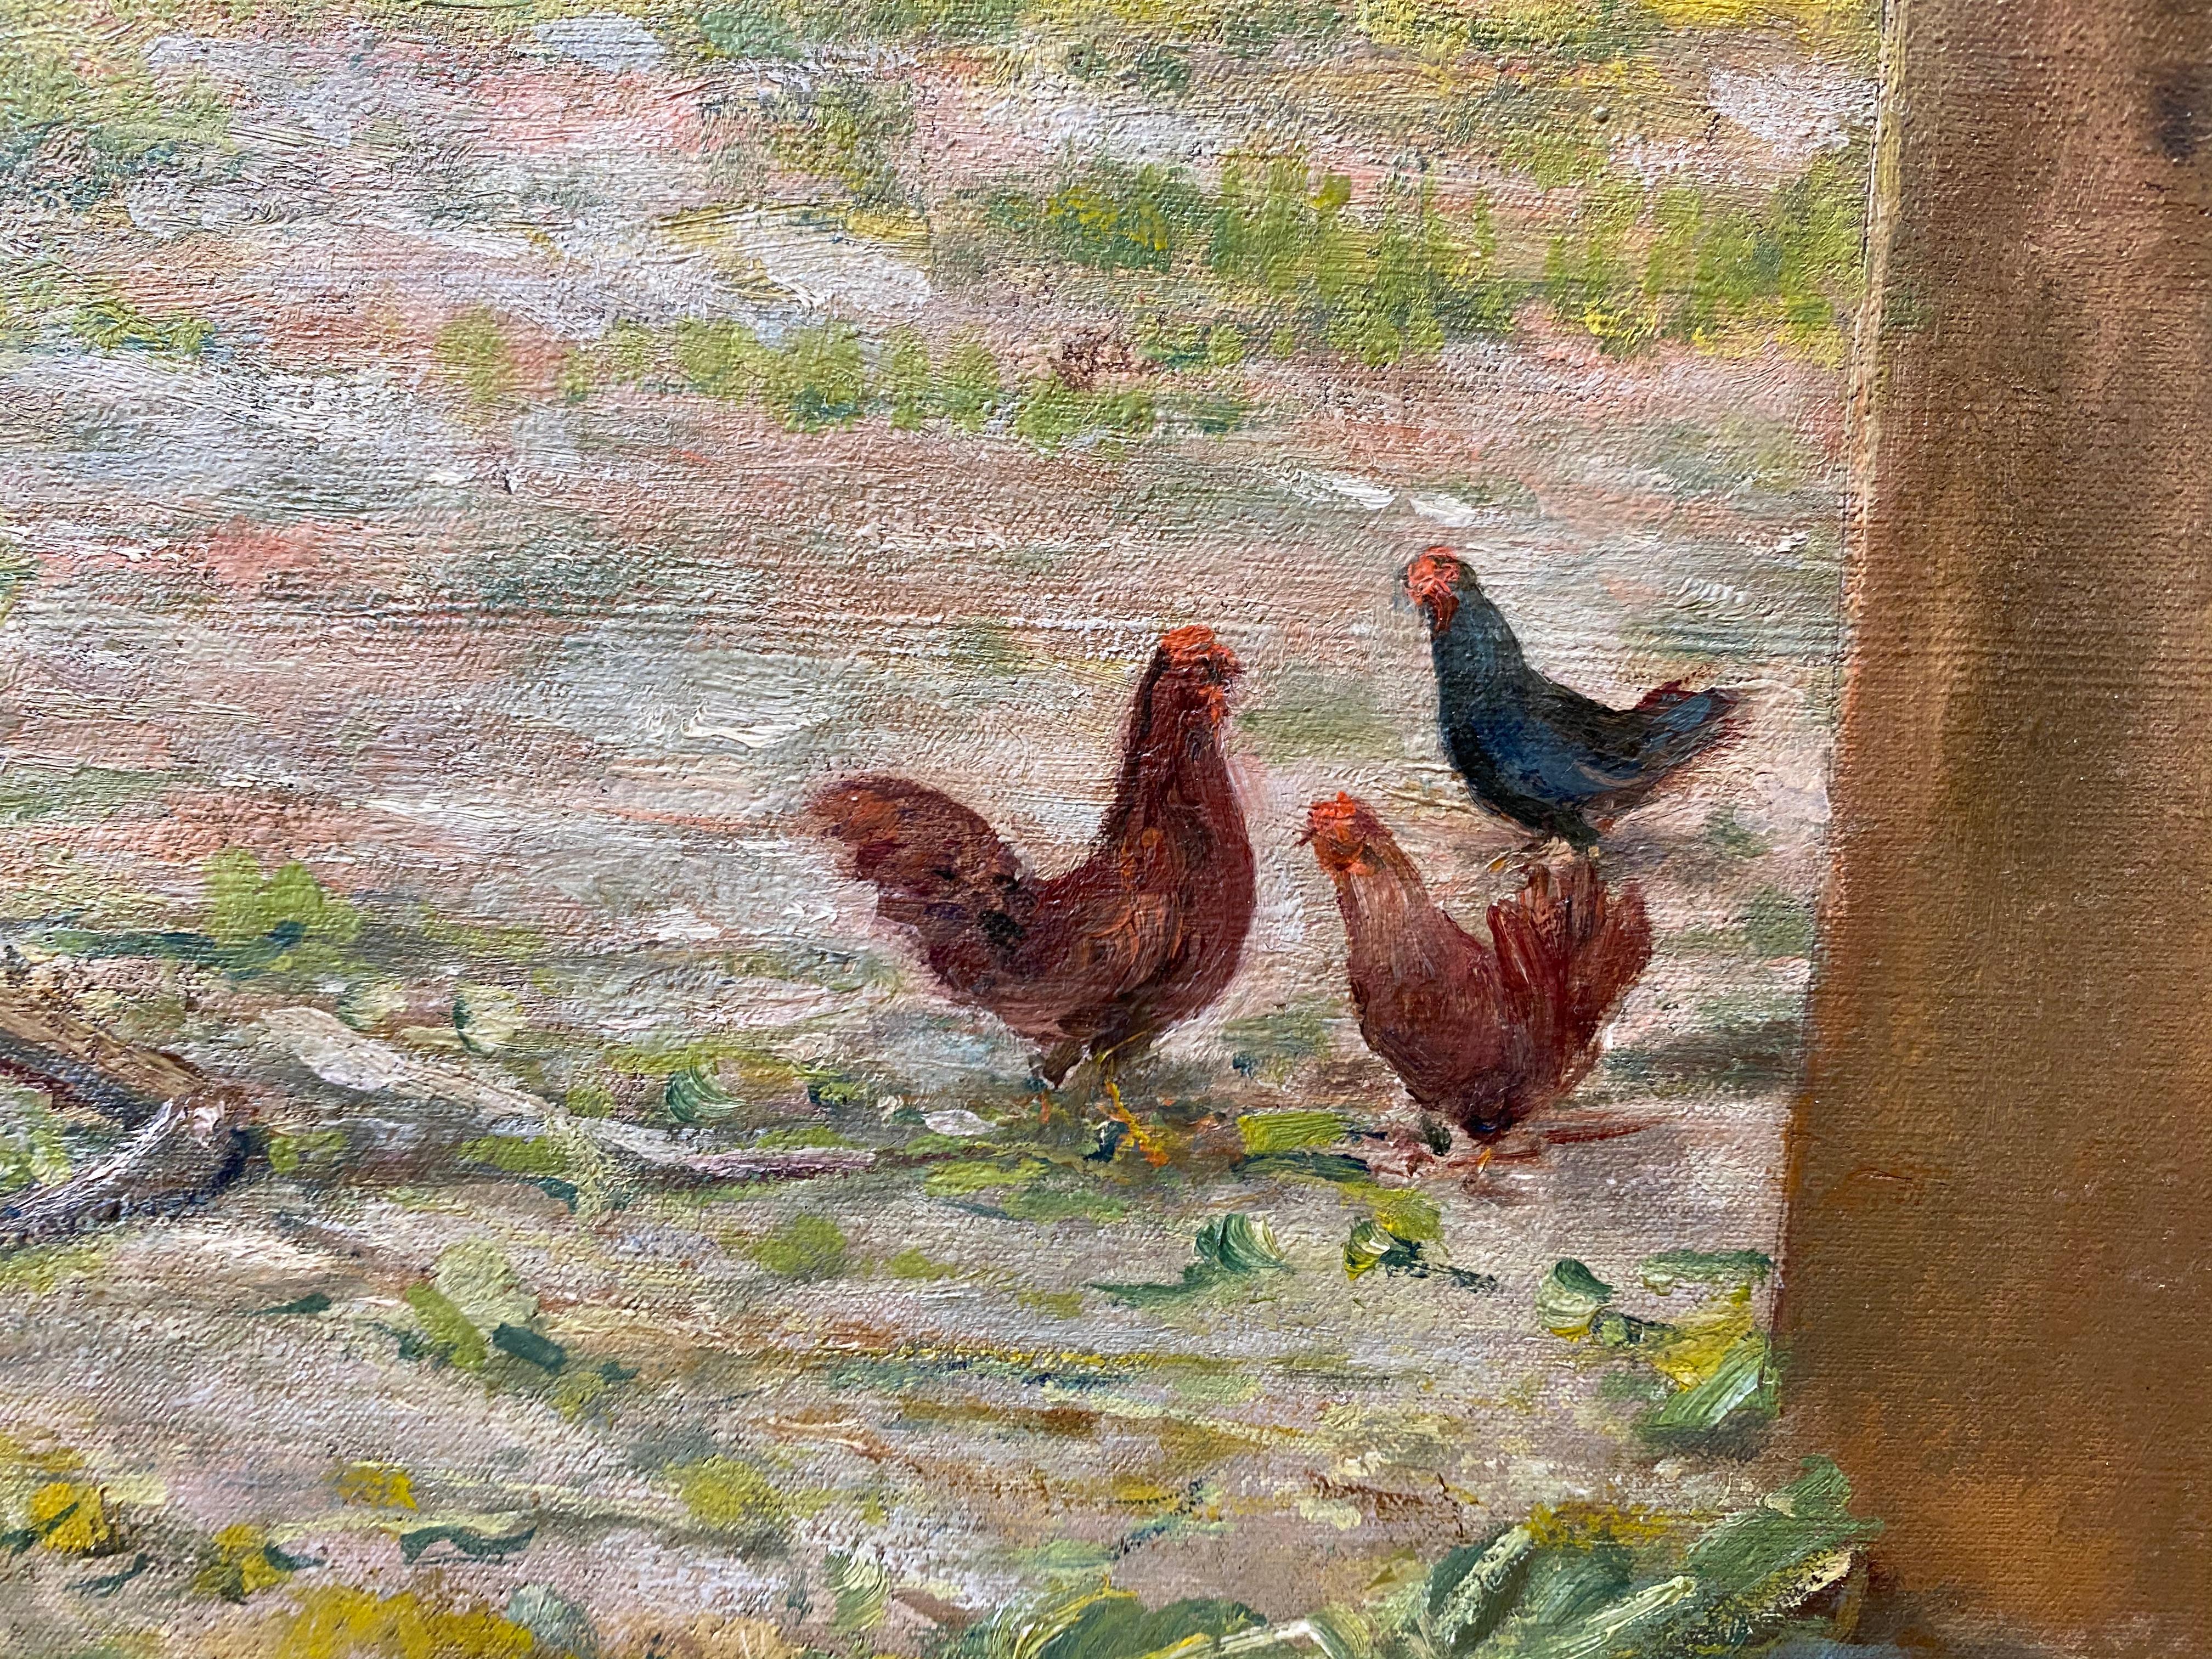 20th C. European Country Landscape W/ Figures & Chickens by A. Schlatter

Original oil on canvas

Dimensions 26.25